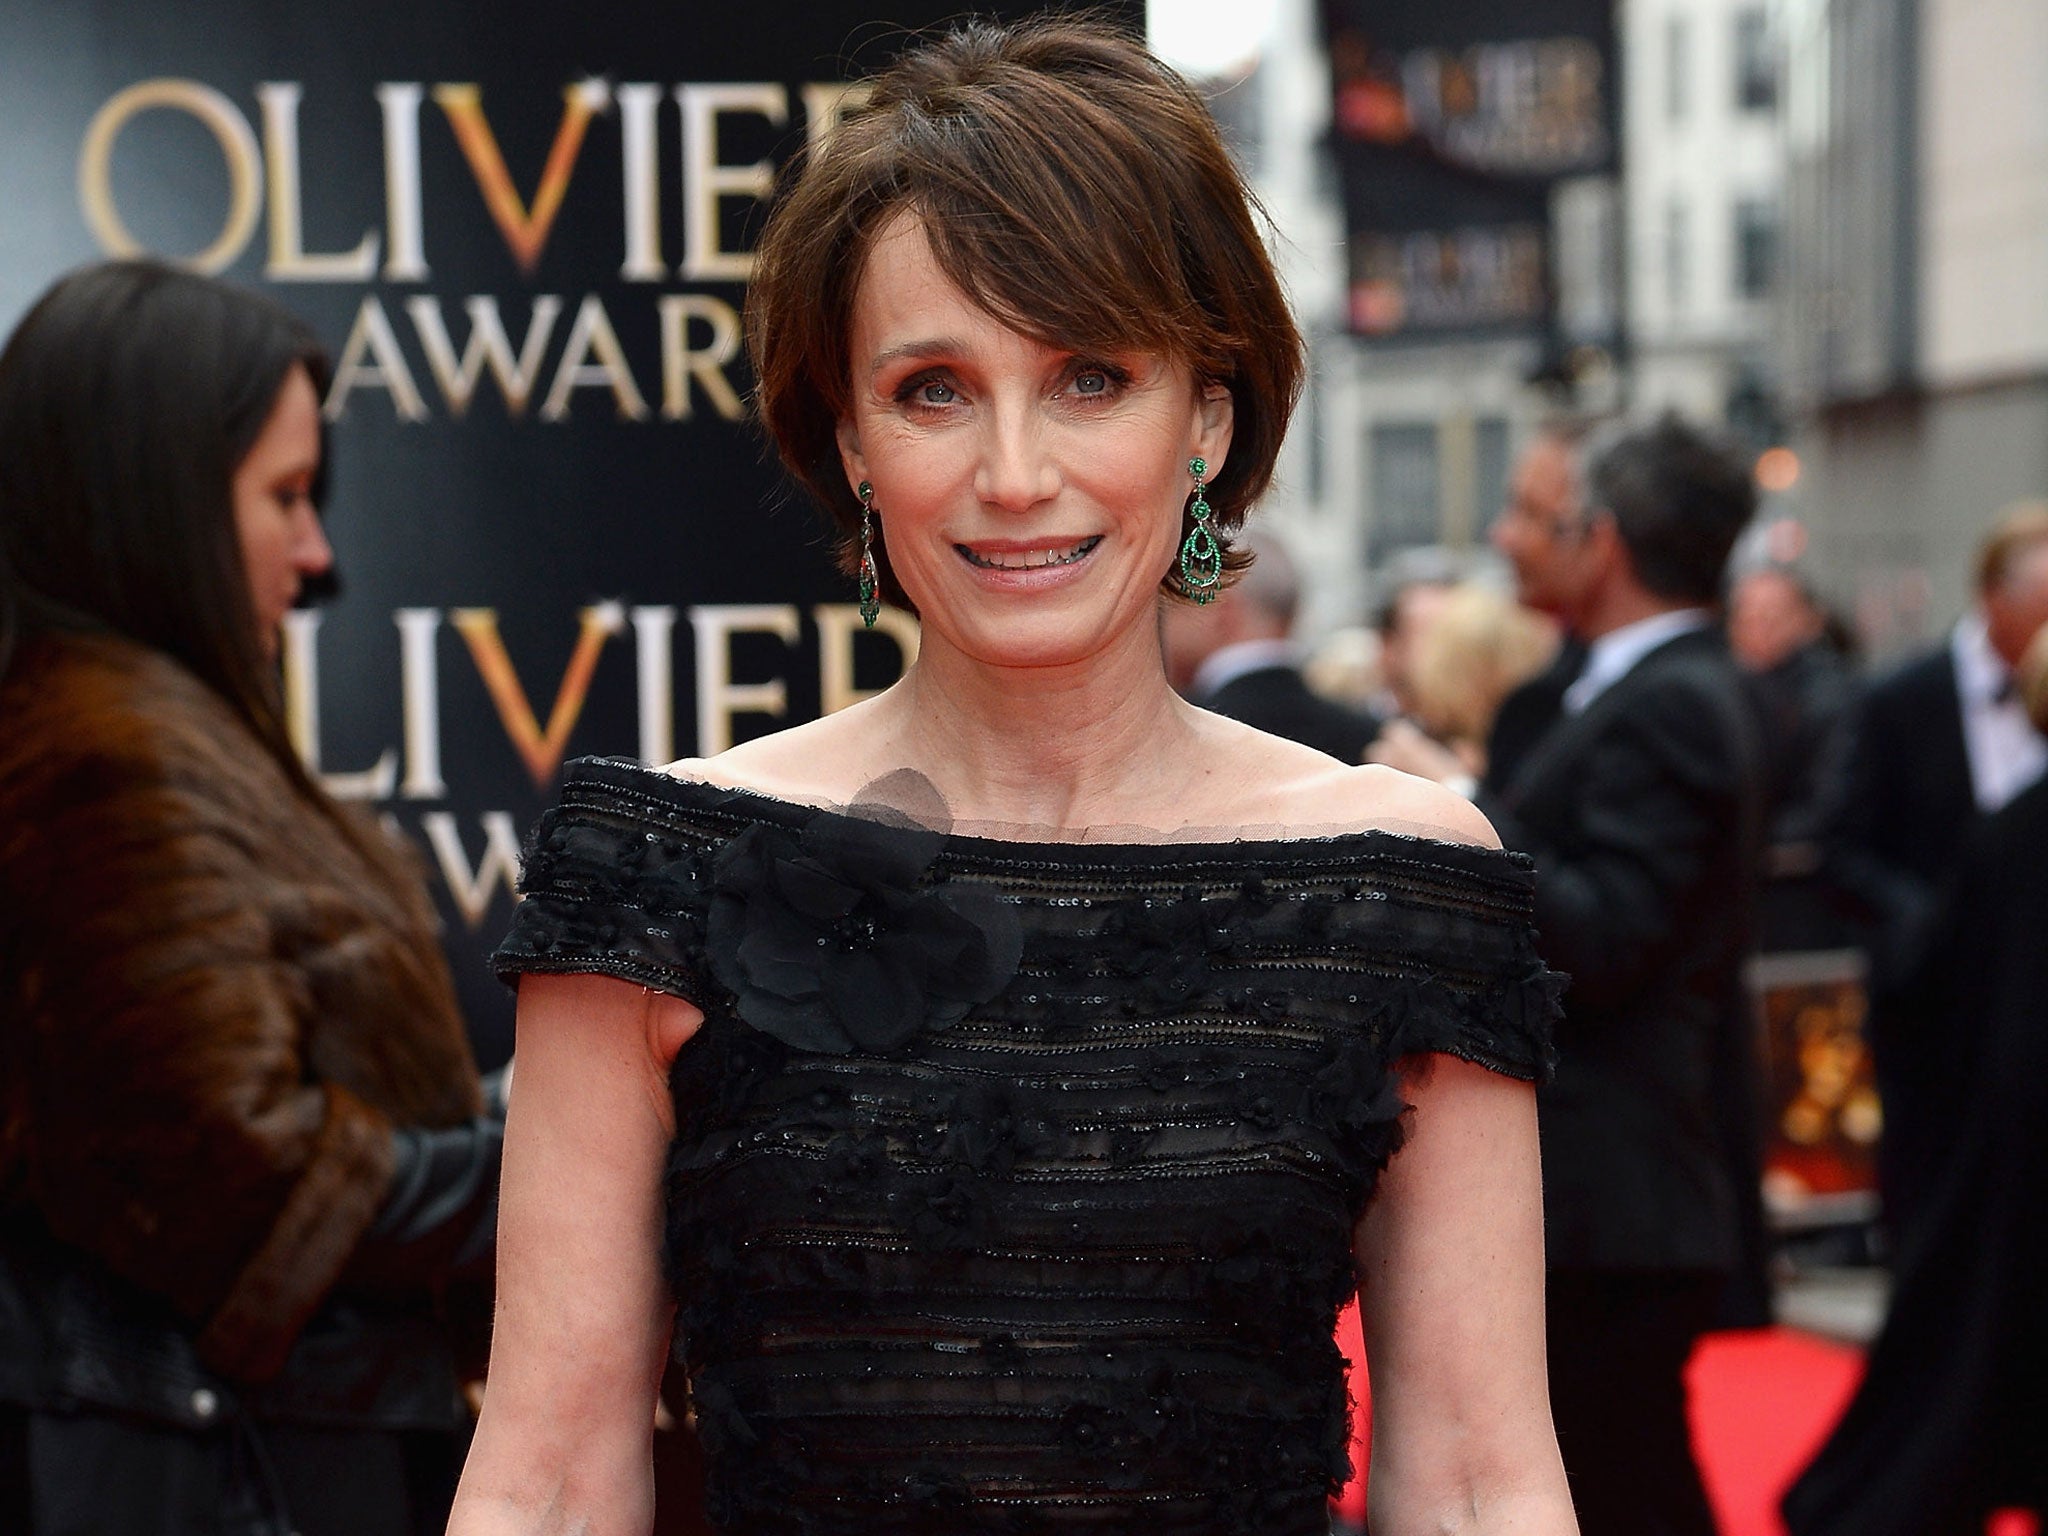 Kristin Scott Thomas attends the Olivier Awards at the Royal Opera House